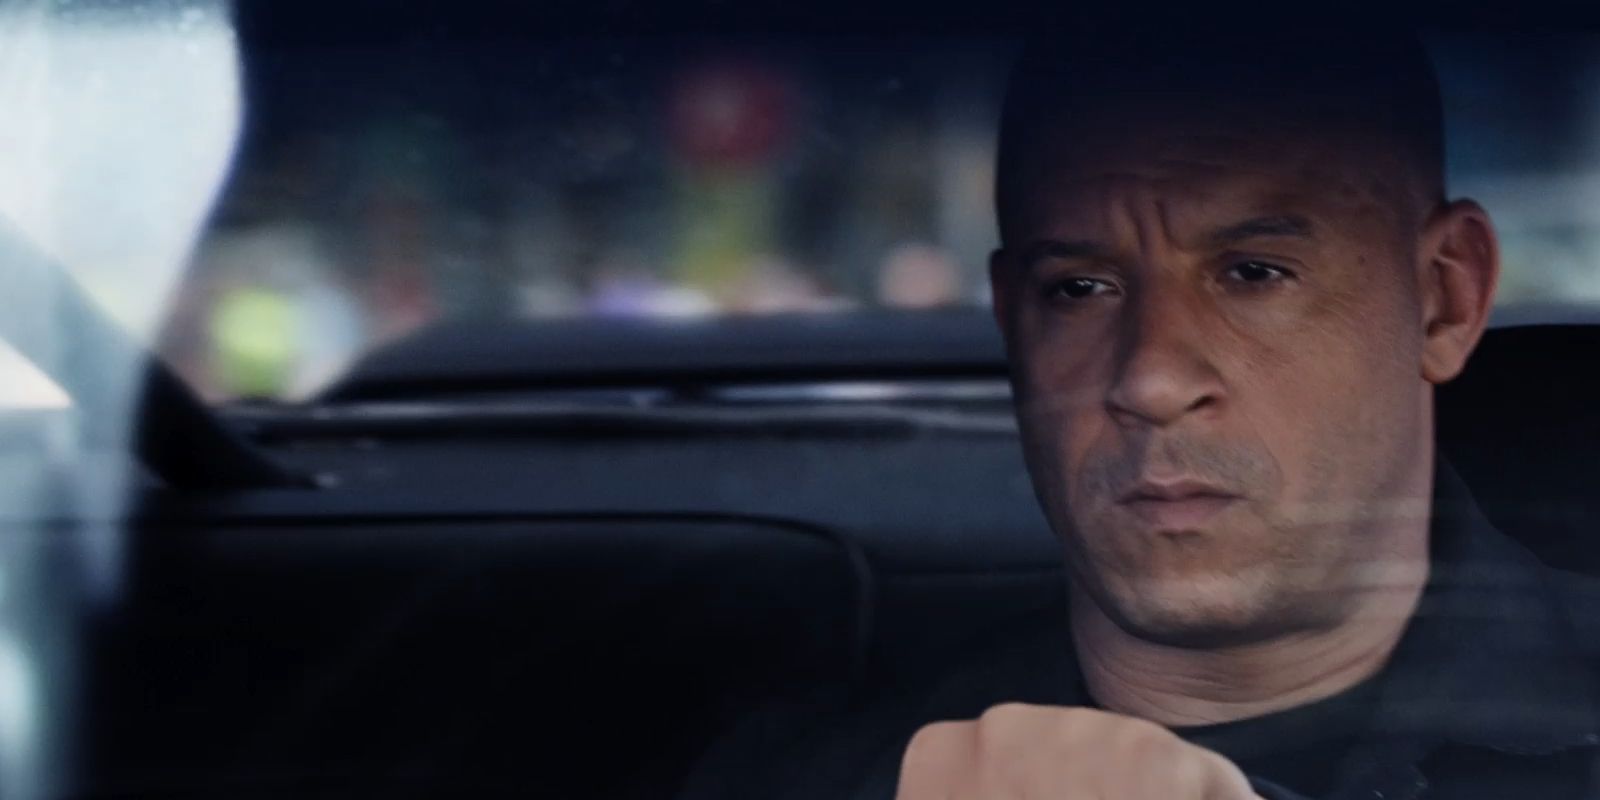 Dominic Toretto looking serious behind the wheel of a car in Fate of the Furious.